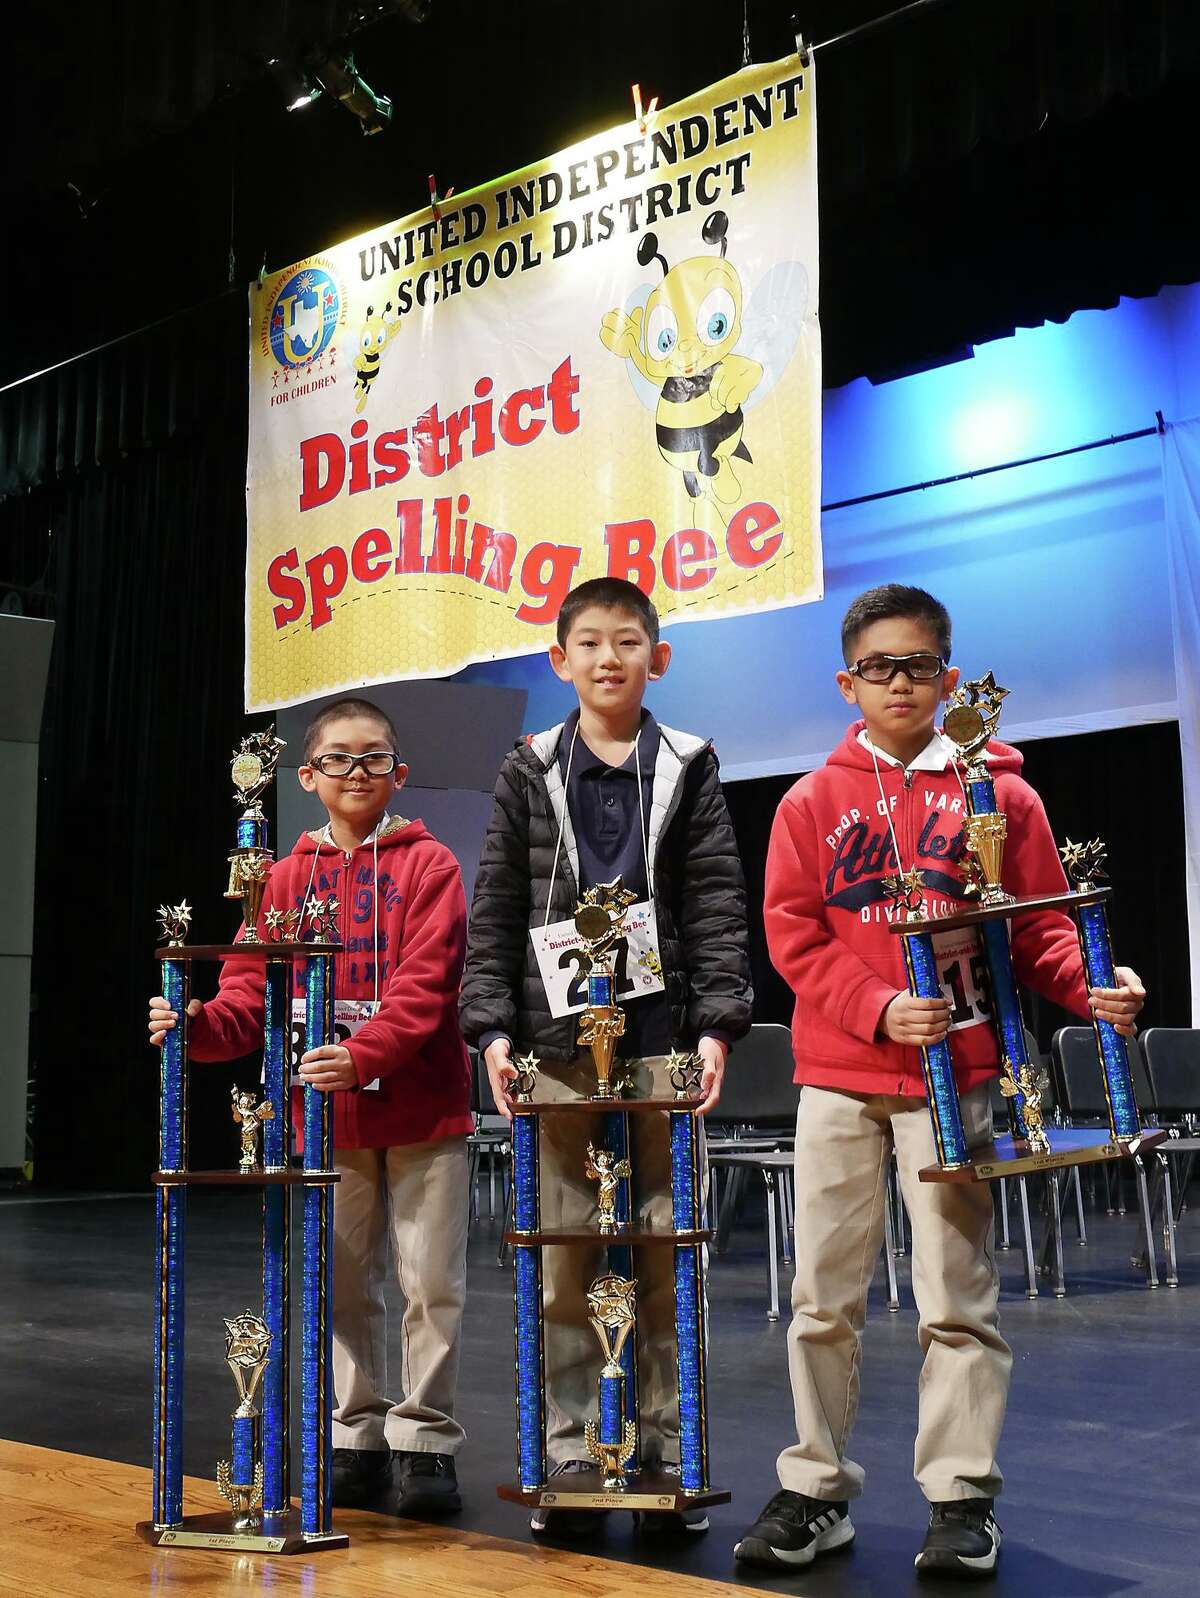 Lamar Bruni Vergara Middle School 6th grade student Emmanuel Rimocal holds the first place trophy he won at the United ISD District Spelling Bee, Thursday, January 31, 2019 at the UISD Student Activity Complex Auditorium. This is Rimocal's second victory at the district level. He was competing against his younger brother Nathaniel, a 4th grade student at Kennedy-Zapata Elementary, who finished in third place.